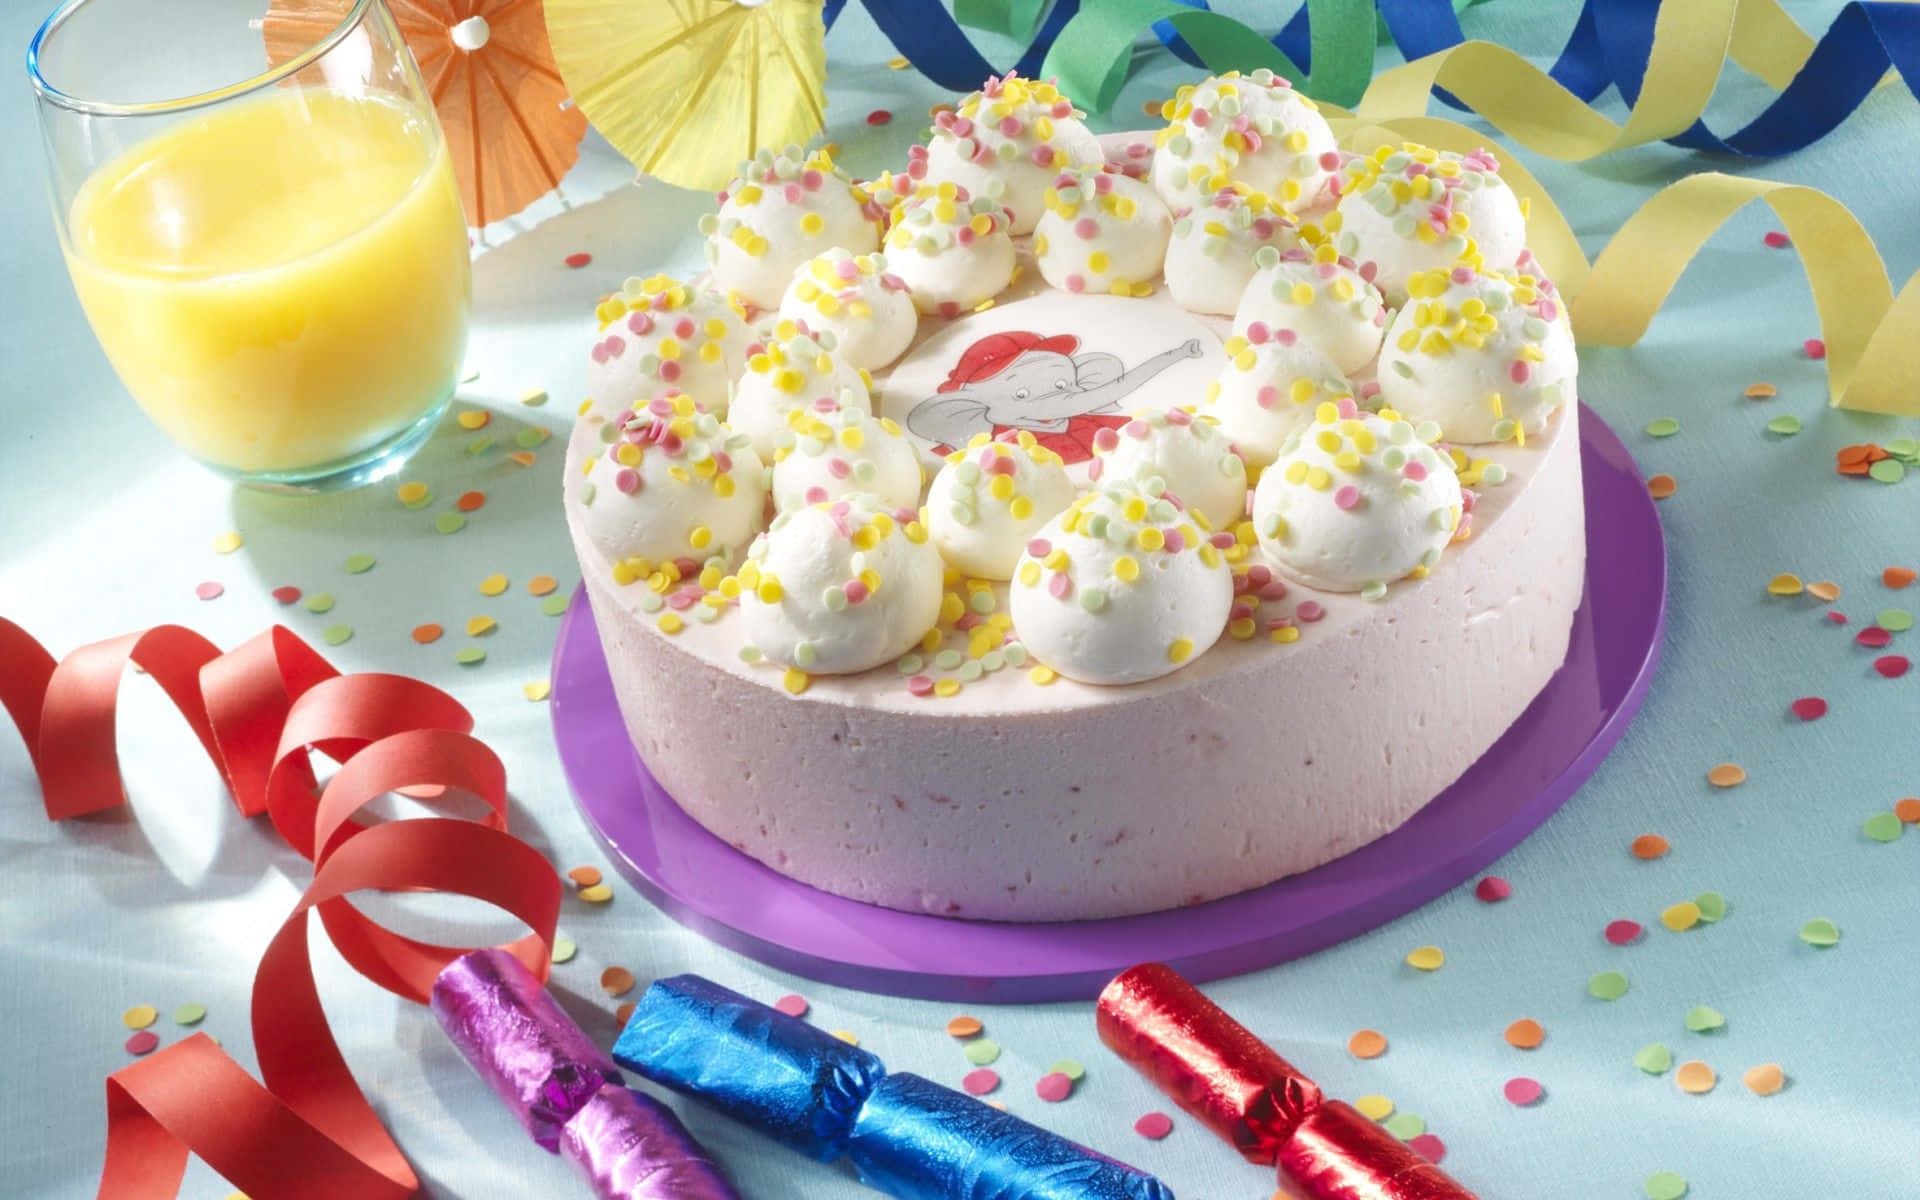 Celebrate any occasion with a delicious birthday cake!